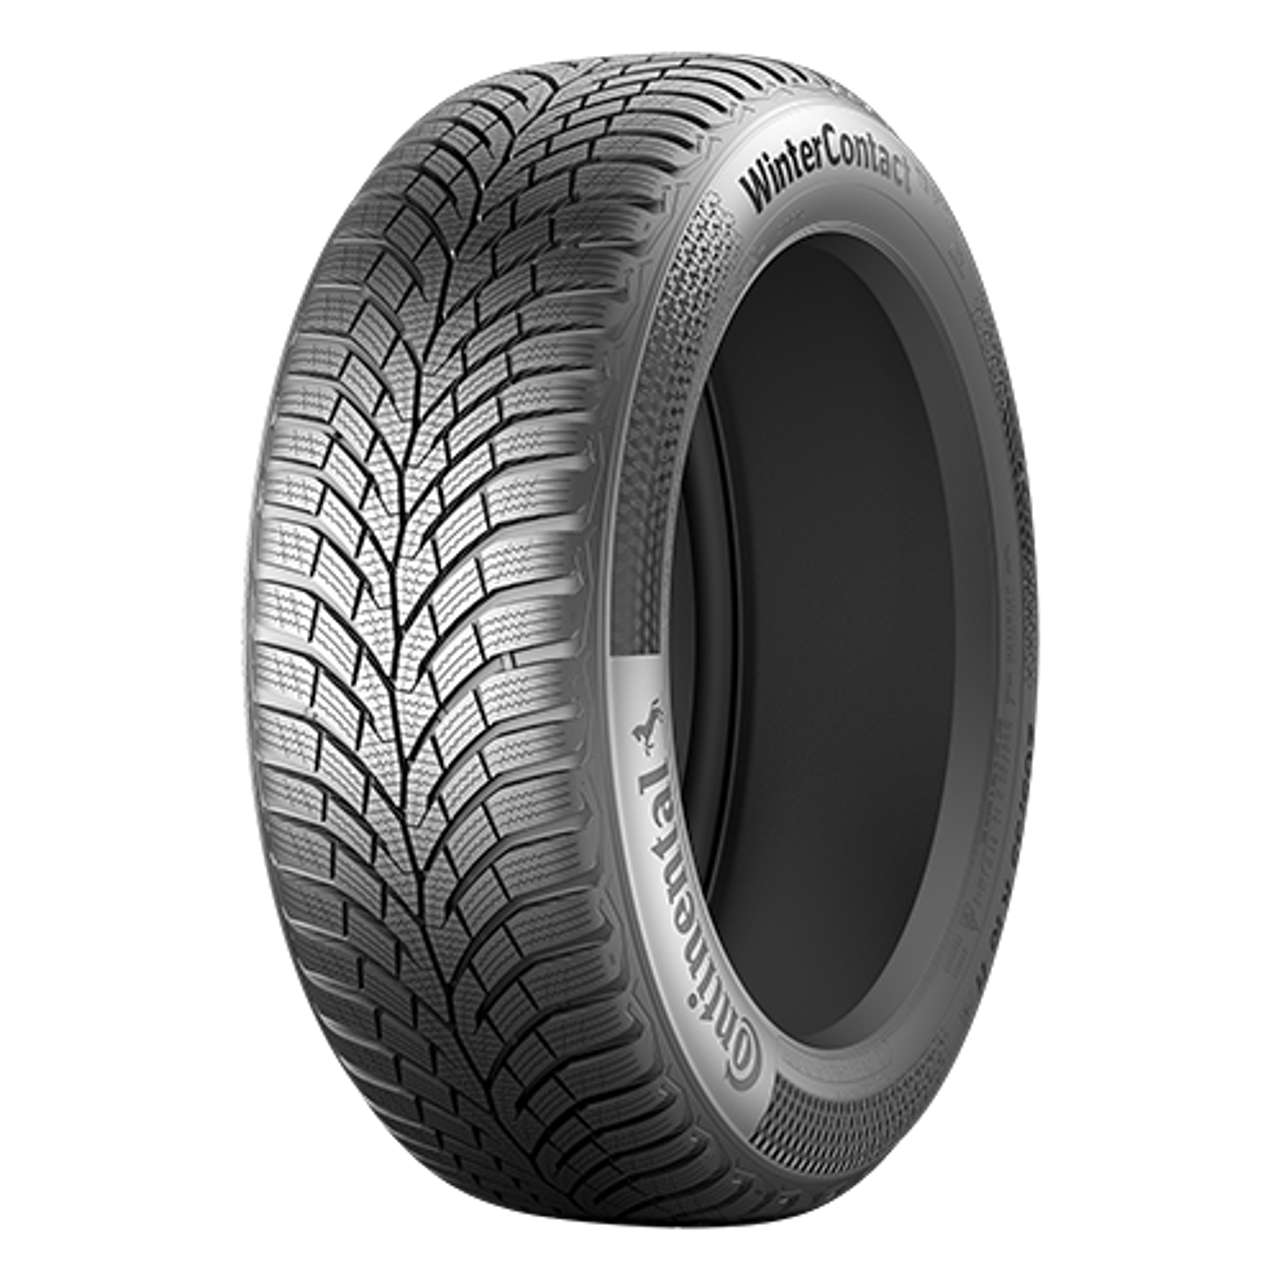 CONTINENTAL WINTERCONTACT TS 870 (EVc) 175/70R14 84T BSW